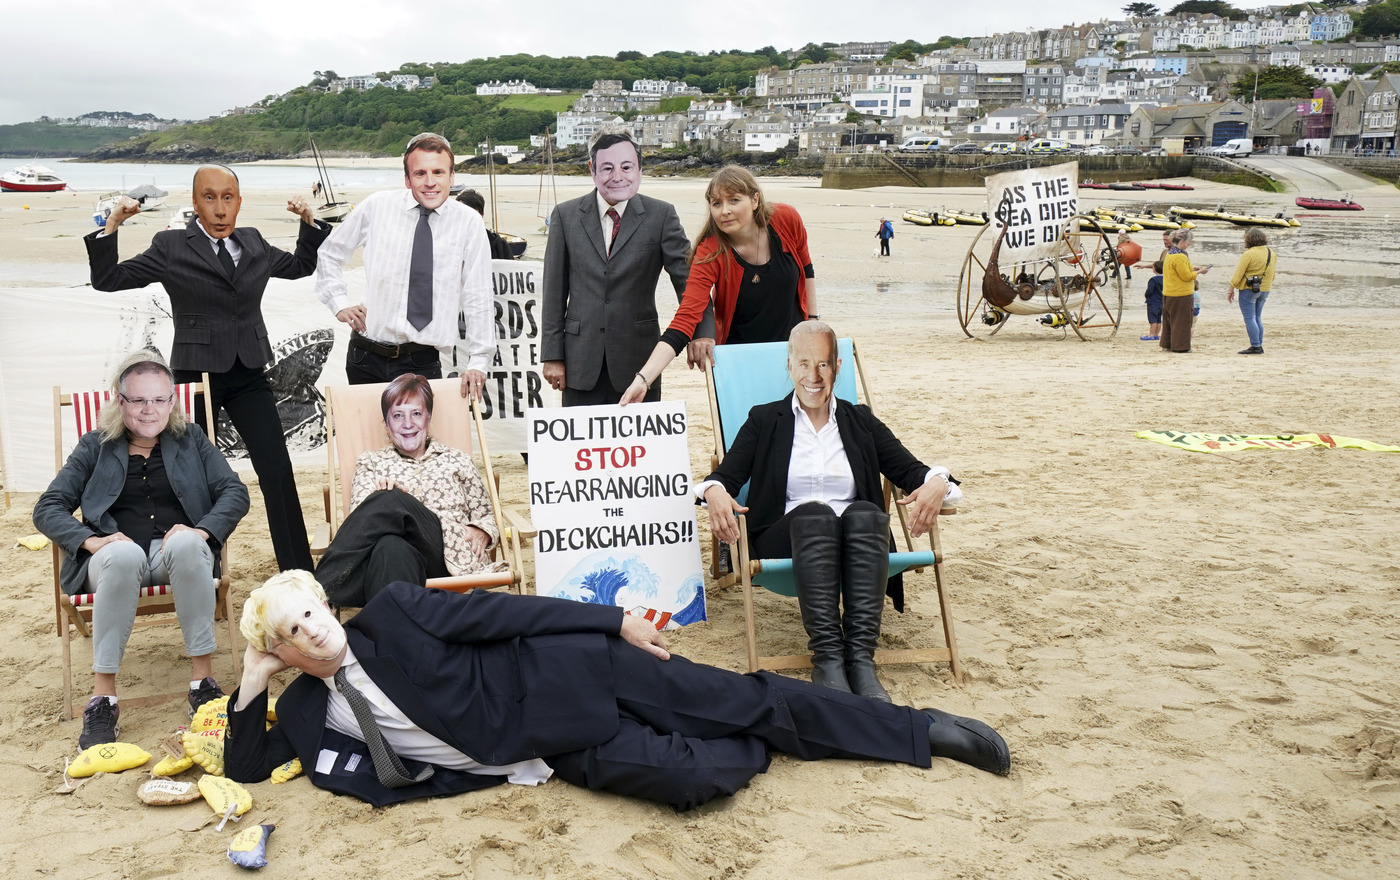 Activists pose with faces of the G7 and other world leaders as they demonstrate on the beach in the harbour near the G7 meeting taking place in St. Ives, Cornwall, England, Friday, June 11, 2021. Leaders of the G7 begin their first of three days of meetings on Friday in Carbis Bay, in which they will discuss COVID-19, climate, foreign policy and the economy. Leaders faces from left, Australia's Prime Minister Scott Morrison, Russian President Vladimir Putin, British Prime Minister Boris Johnson, French President Emmanuel Macron, German Chancellor Angela Merkel, Italy's Prime Minister Mario Draghi and U.S. President Joe Biden. (AP Photo/Jon Super)